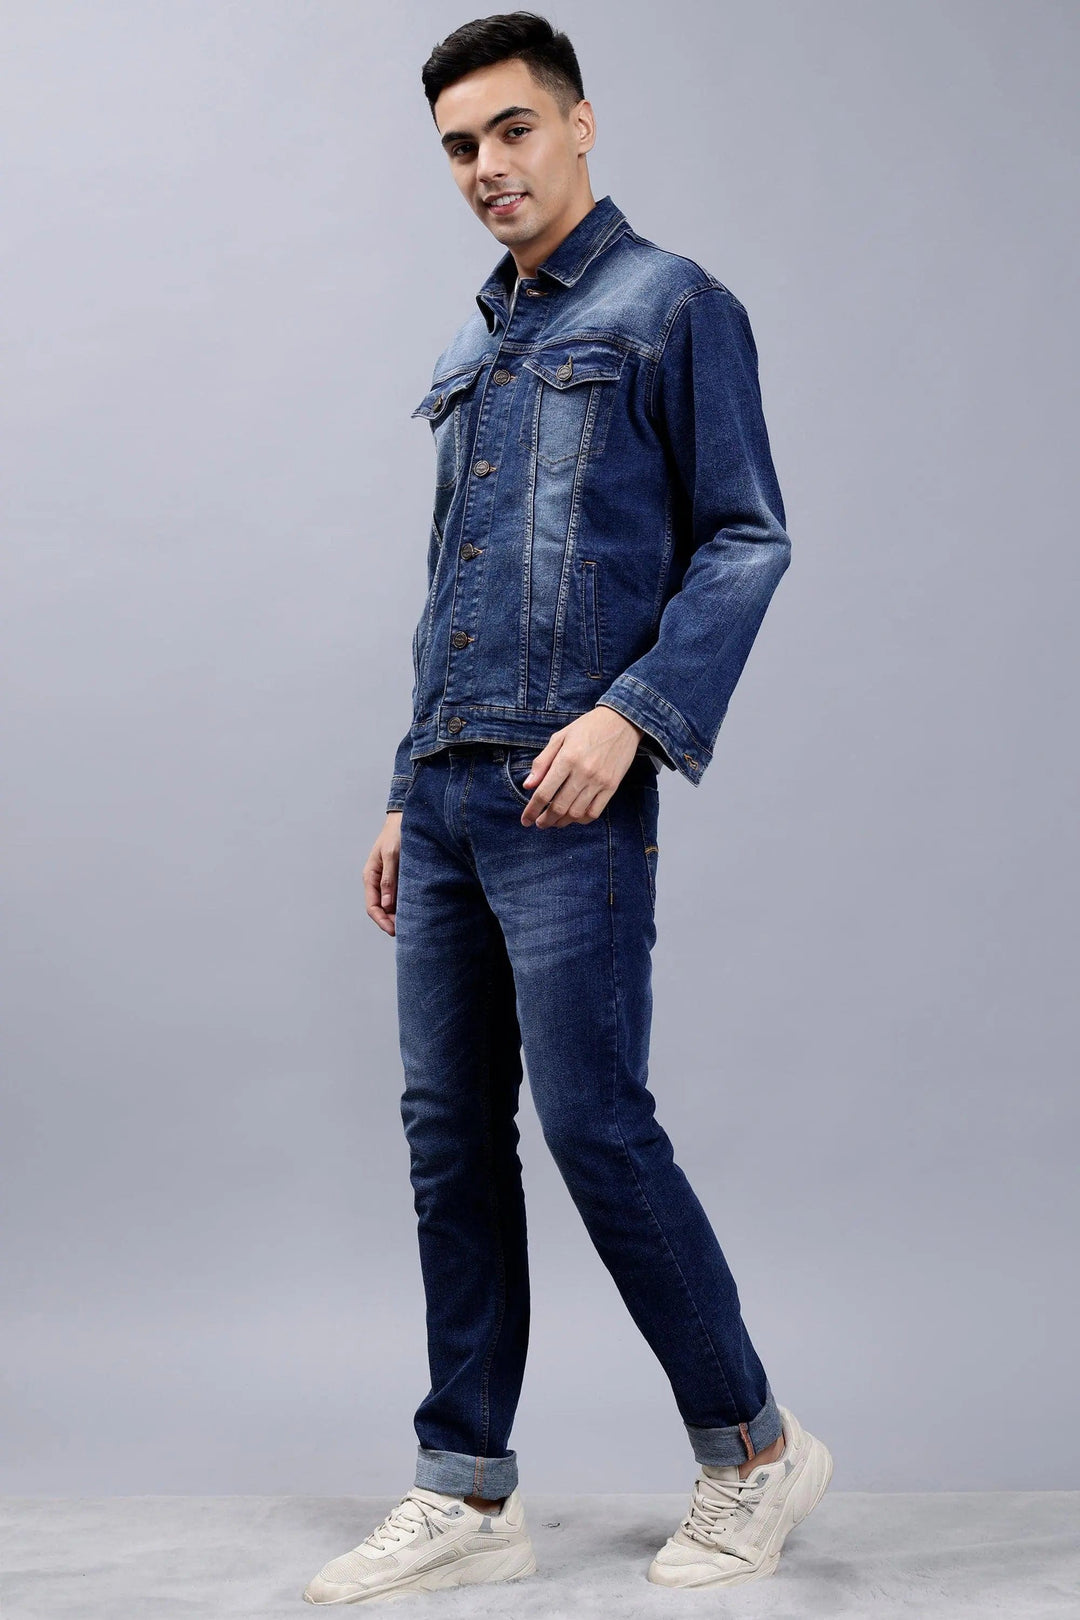 Buy Denim Solid Co-ord Set Cotton Shirt for Best Price, Reviews, Free  Shipping